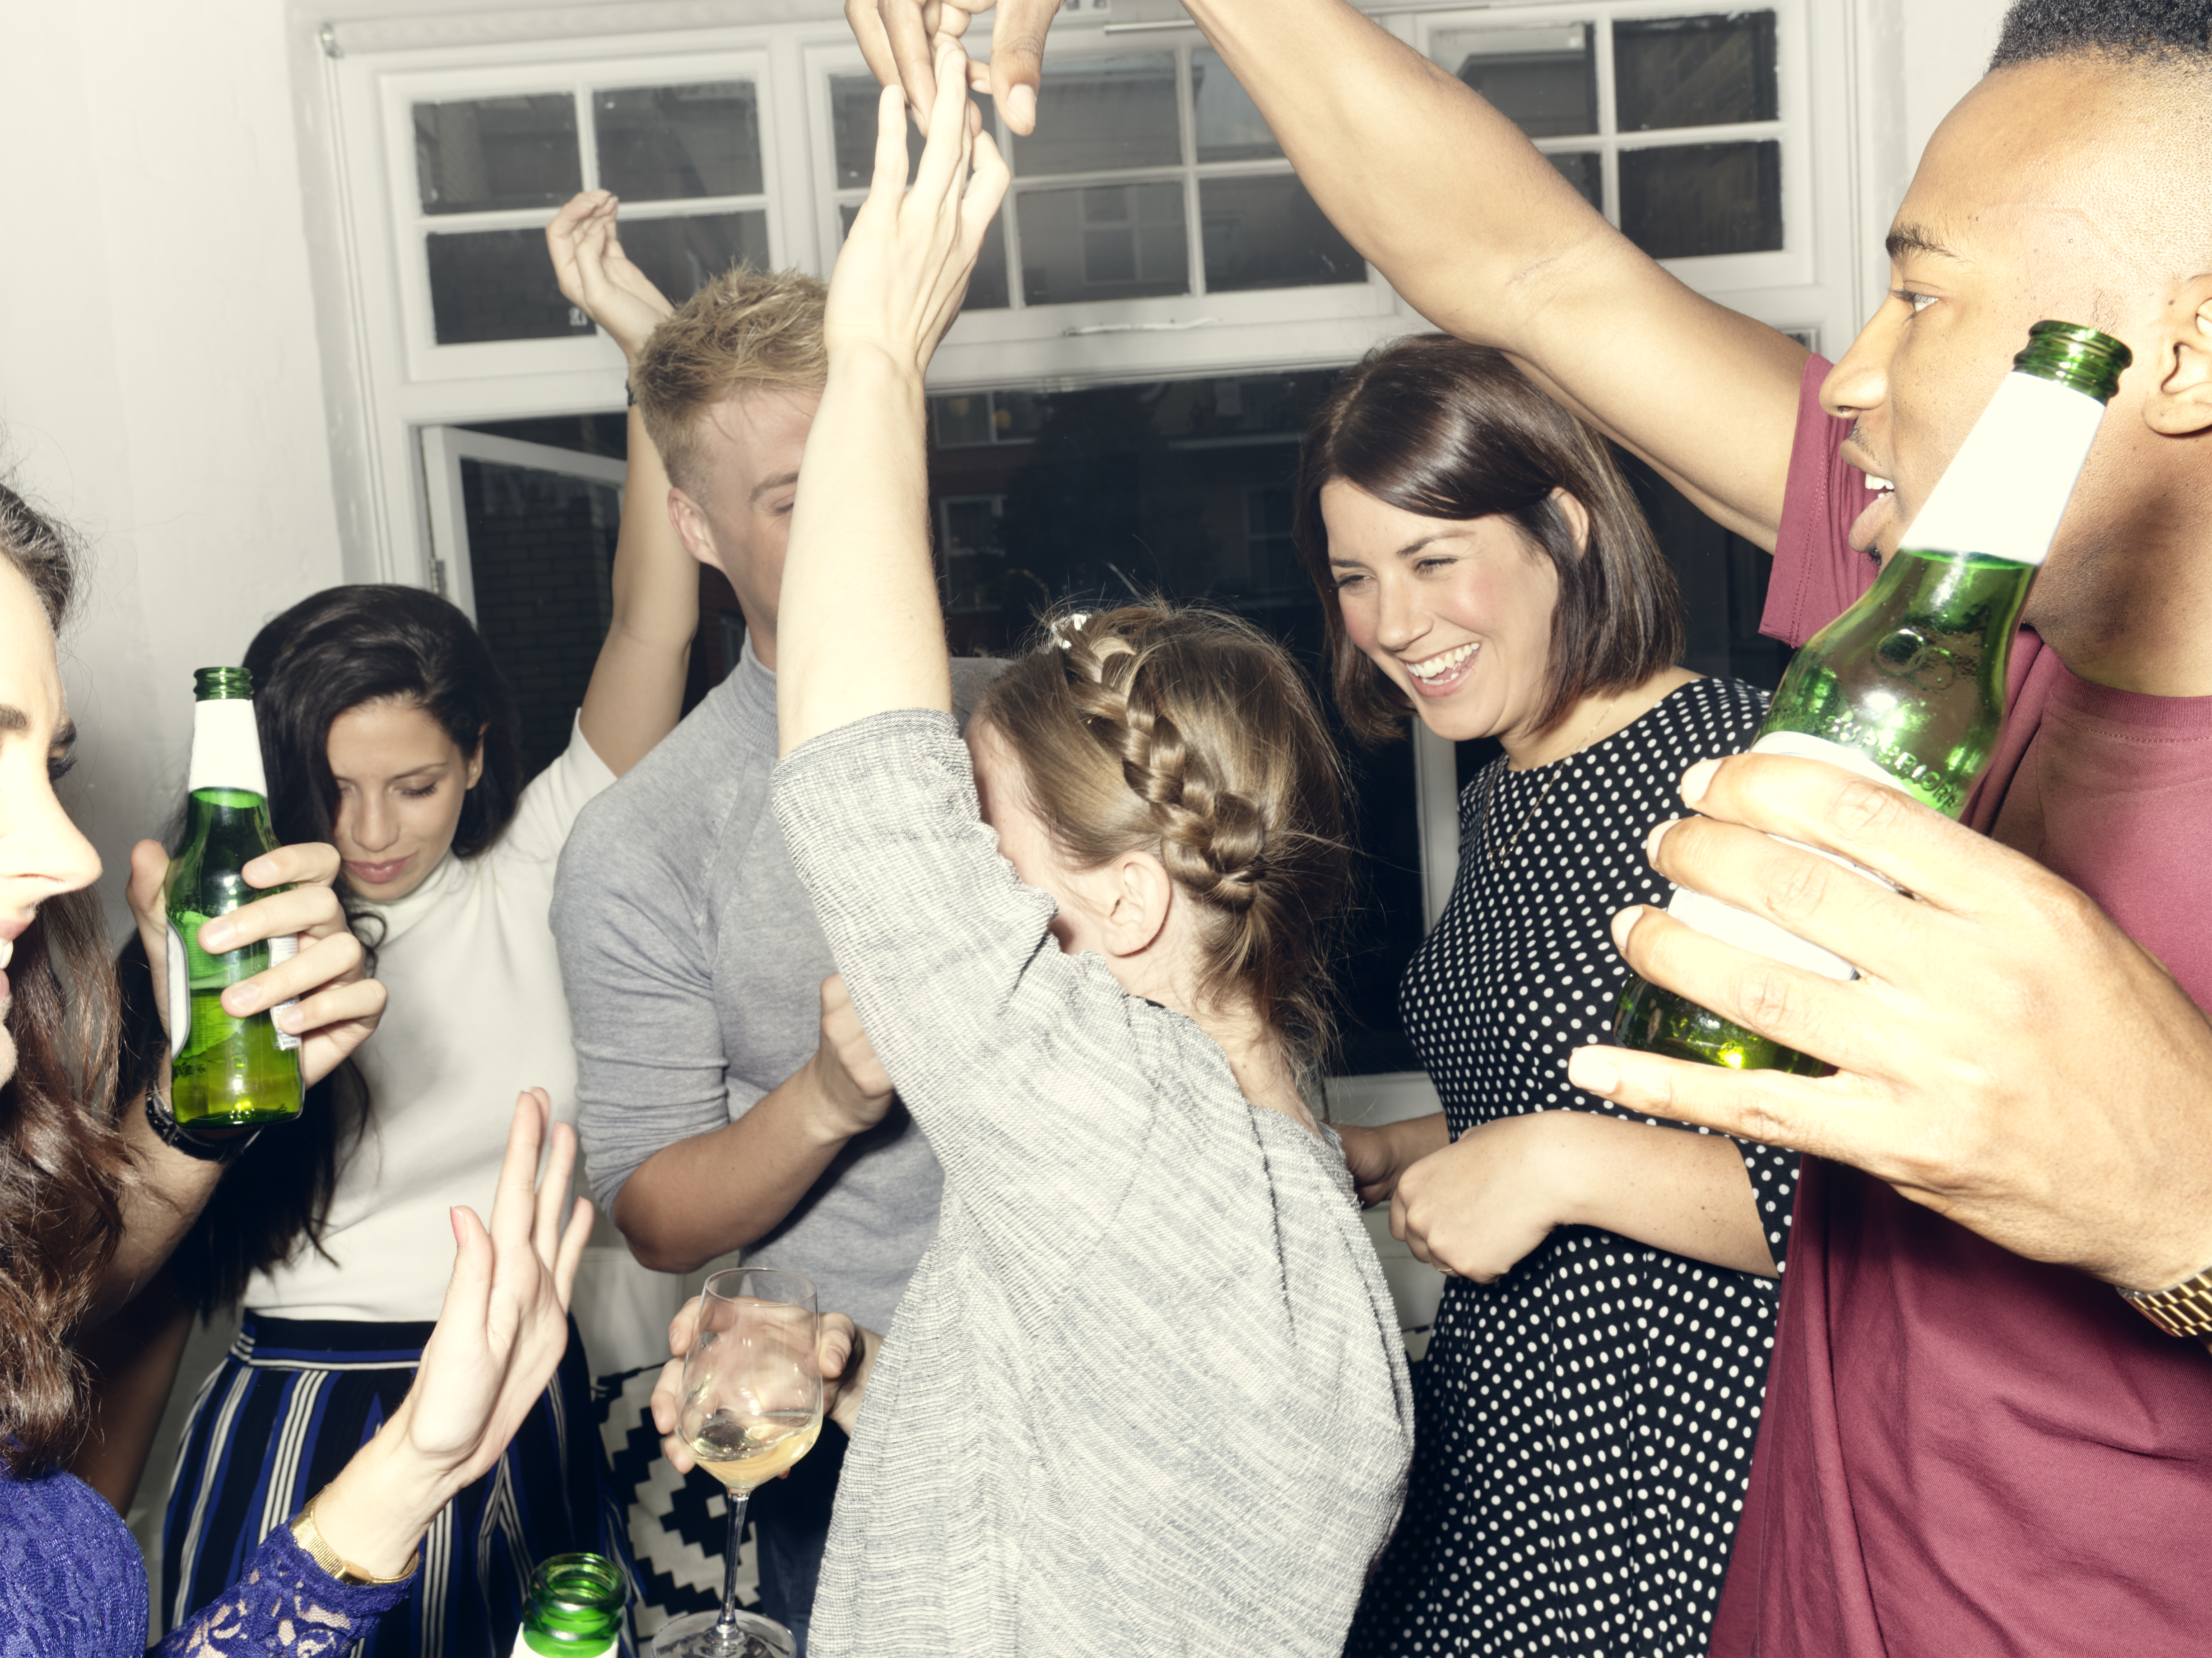 A party in an apartment | Source: Getty Images